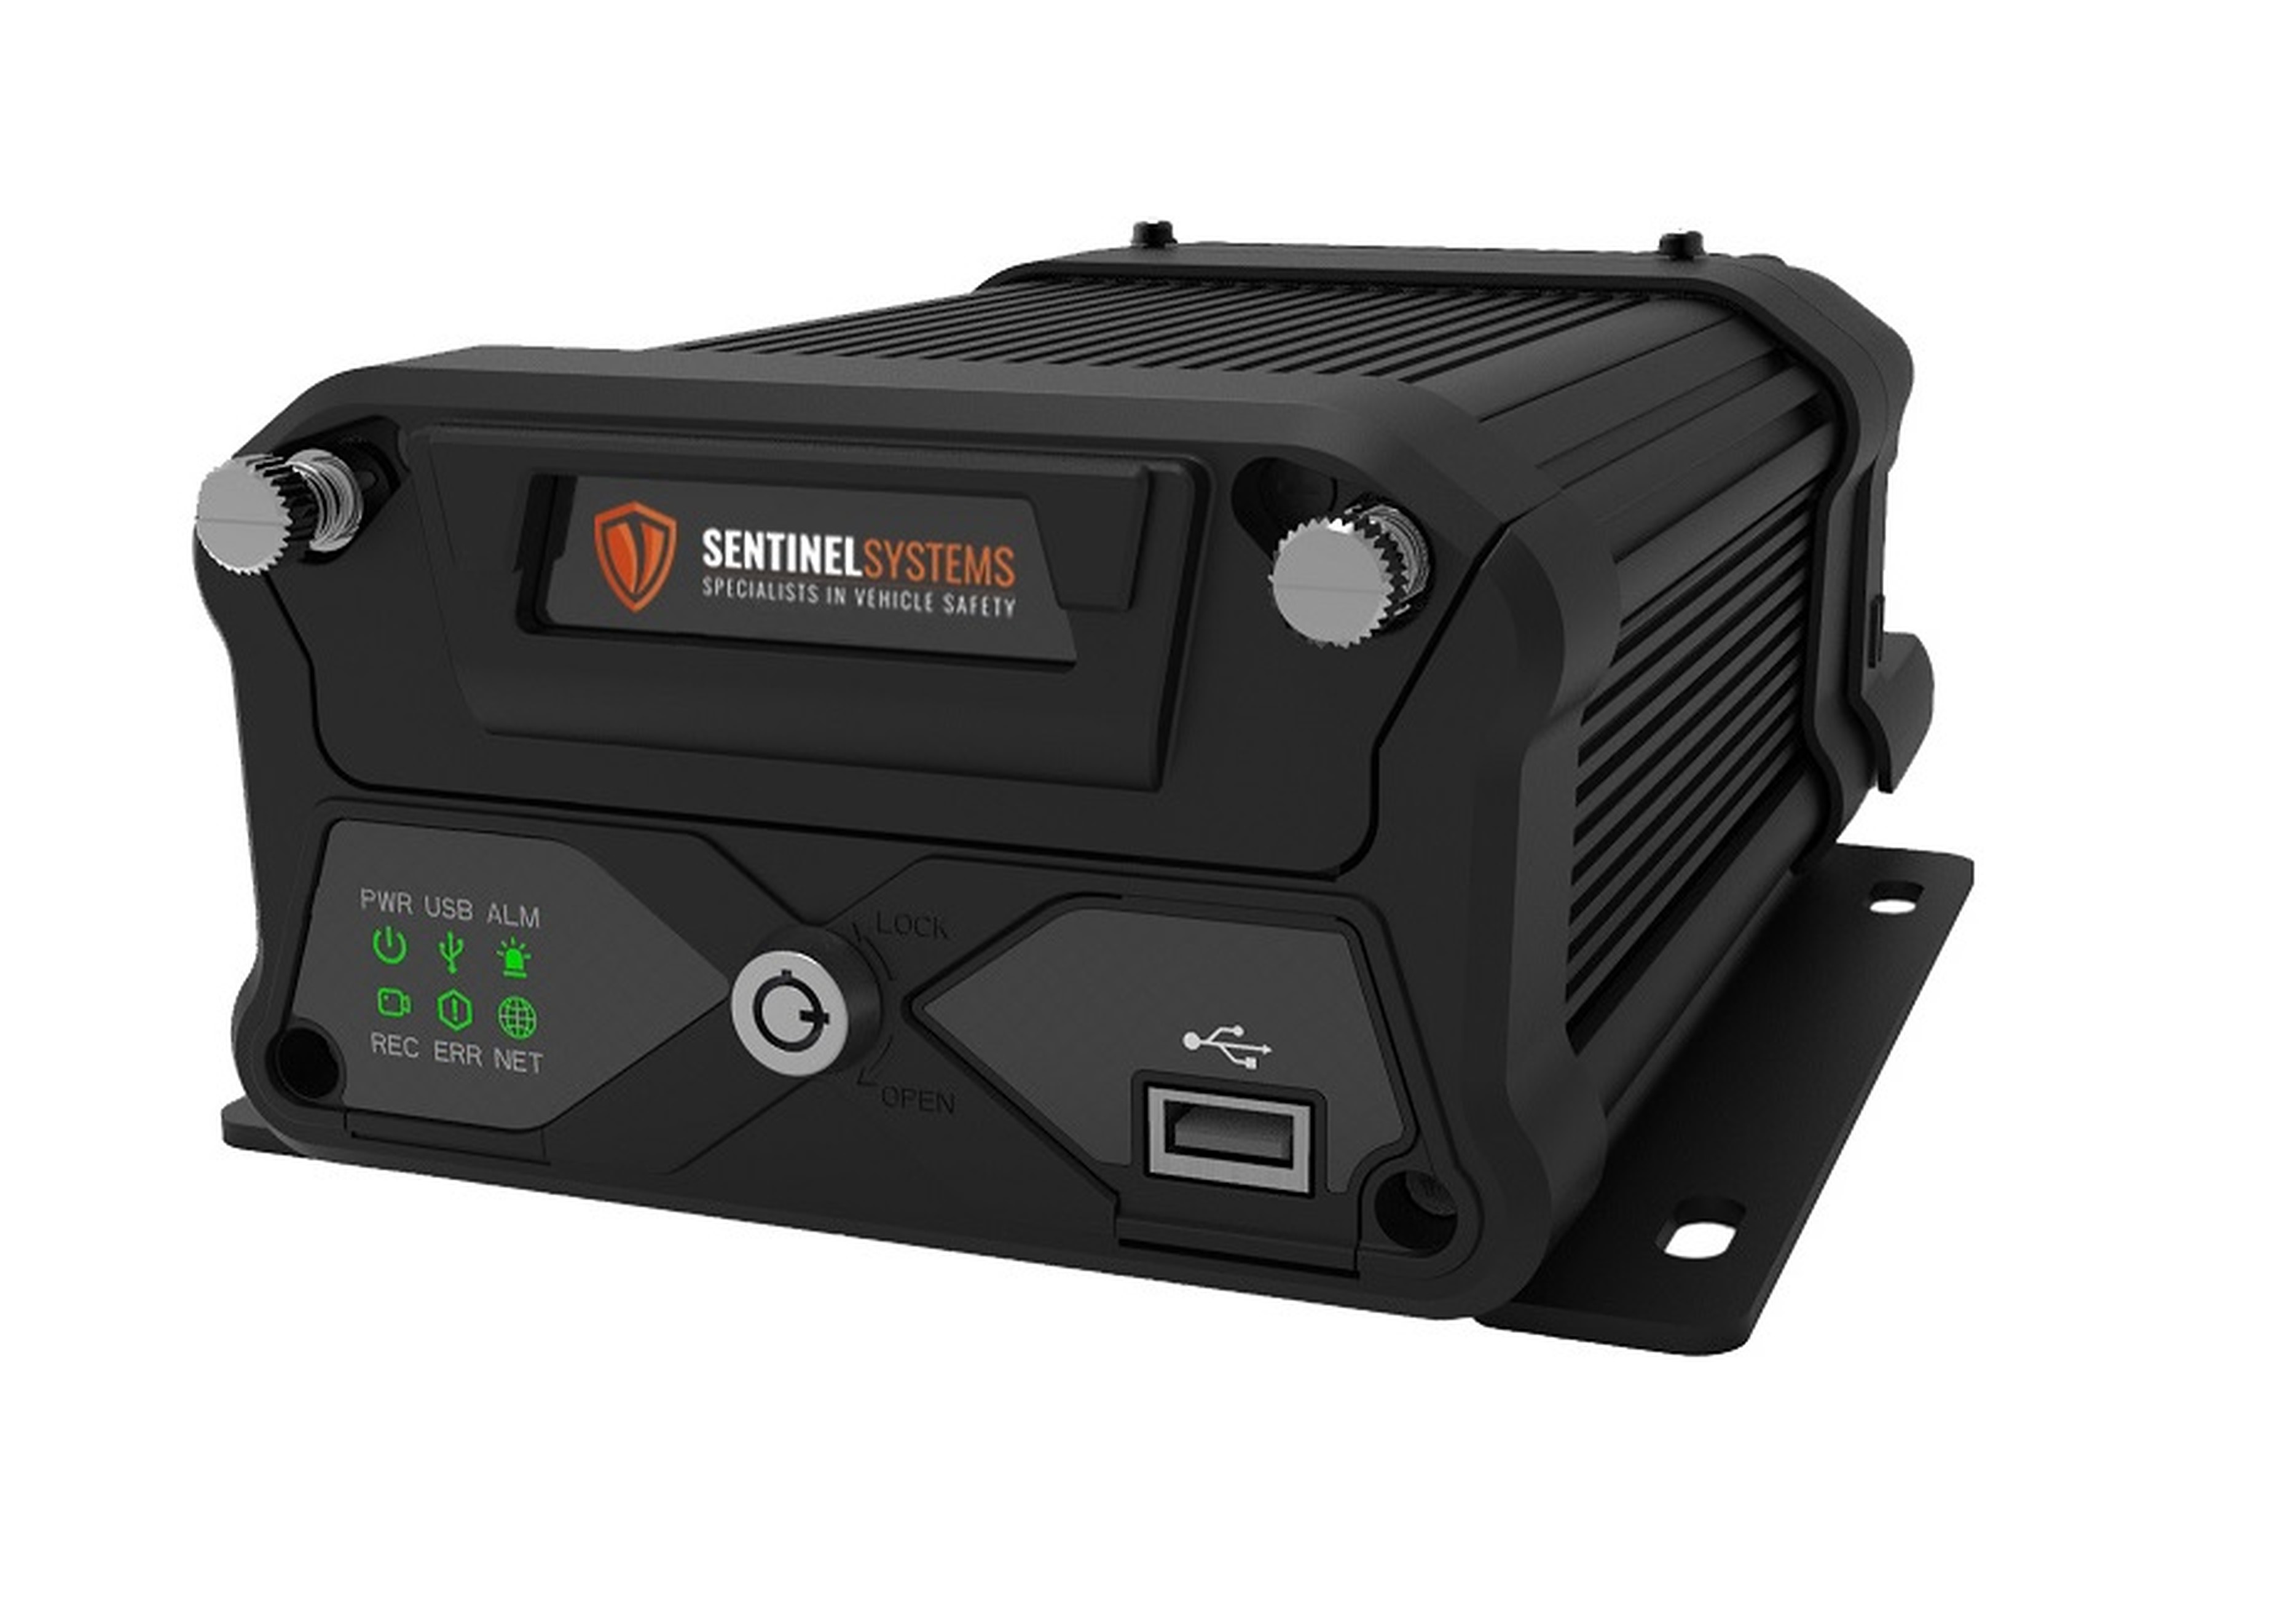 SENTINEL LAUNCHES NEW 6 CHANNEL MOBILE DVR @reversesafely